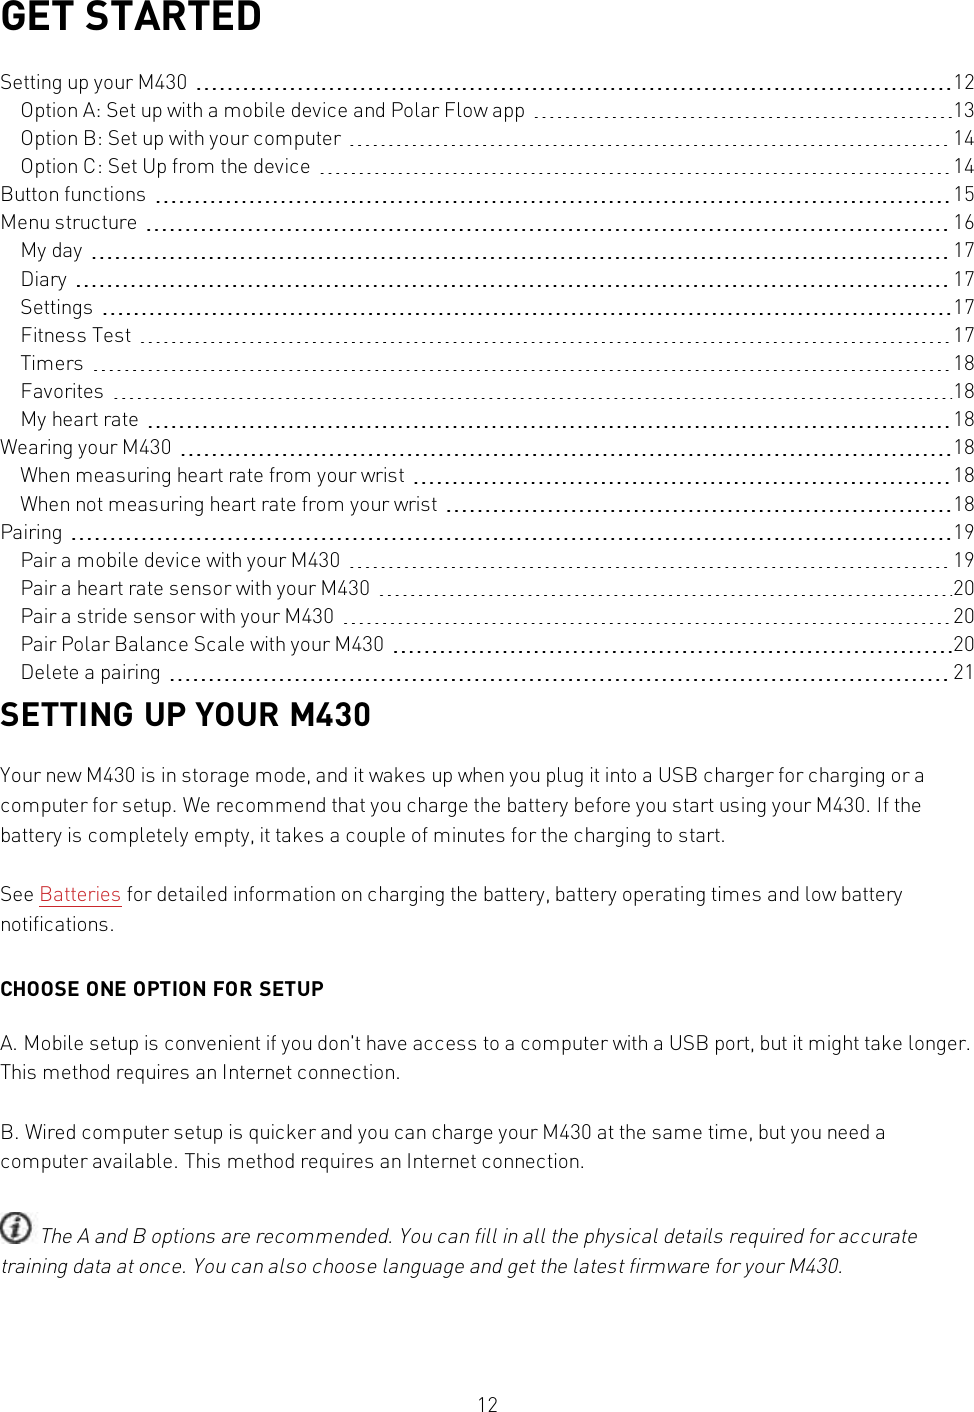 12GET STARTEDSetting up your M430 12Option A: Set up with a mobile device and Polar Flow app 13Option B: Set up with your computer 14Option C: Set Up from the device 14Button functions 15Menu structure 16My day 17Diary 17Settings 17Fitness Test 17Timers 18Favorites 18My heart rate 18Wearing your M430 18When measuring heart rate from your wrist 18When not measuring heart rate from your wrist 18Pairing 19Pair a mobile device with your M430 19Pair a heart rate sensor with your M430 20Pair a stride sensor with your M430 20Pair Polar Balance Scale with your M430 20Delete a pairing 21SETTING UP YOUR M430Your new M430 is in storage mode, and it wakes up when you plug it into a USB charger for charging or acomputer for setup. We recommend that you charge the battery before you start using your M430. If thebattery is completely empty, it takes a couple of minutes for the charging to start.See Batteries for detailed information on charging the battery, battery operating times and low batterynotifications.CHOOSE ONE OPTION FOR SETUPA. Mobile setup is convenient if you don&apos;t have access to a computer with a USB port, but it might take longer.This method requires an Internet connection.B. Wired computer setup is quicker and you can charge your M430 at the same time, but you need acomputer available. This method requires an Internet connection.The A and B options are recommended. You can fill in all the physical details required for accuratetraining data at once. You can also choose language and get the latest firmware for your M430.